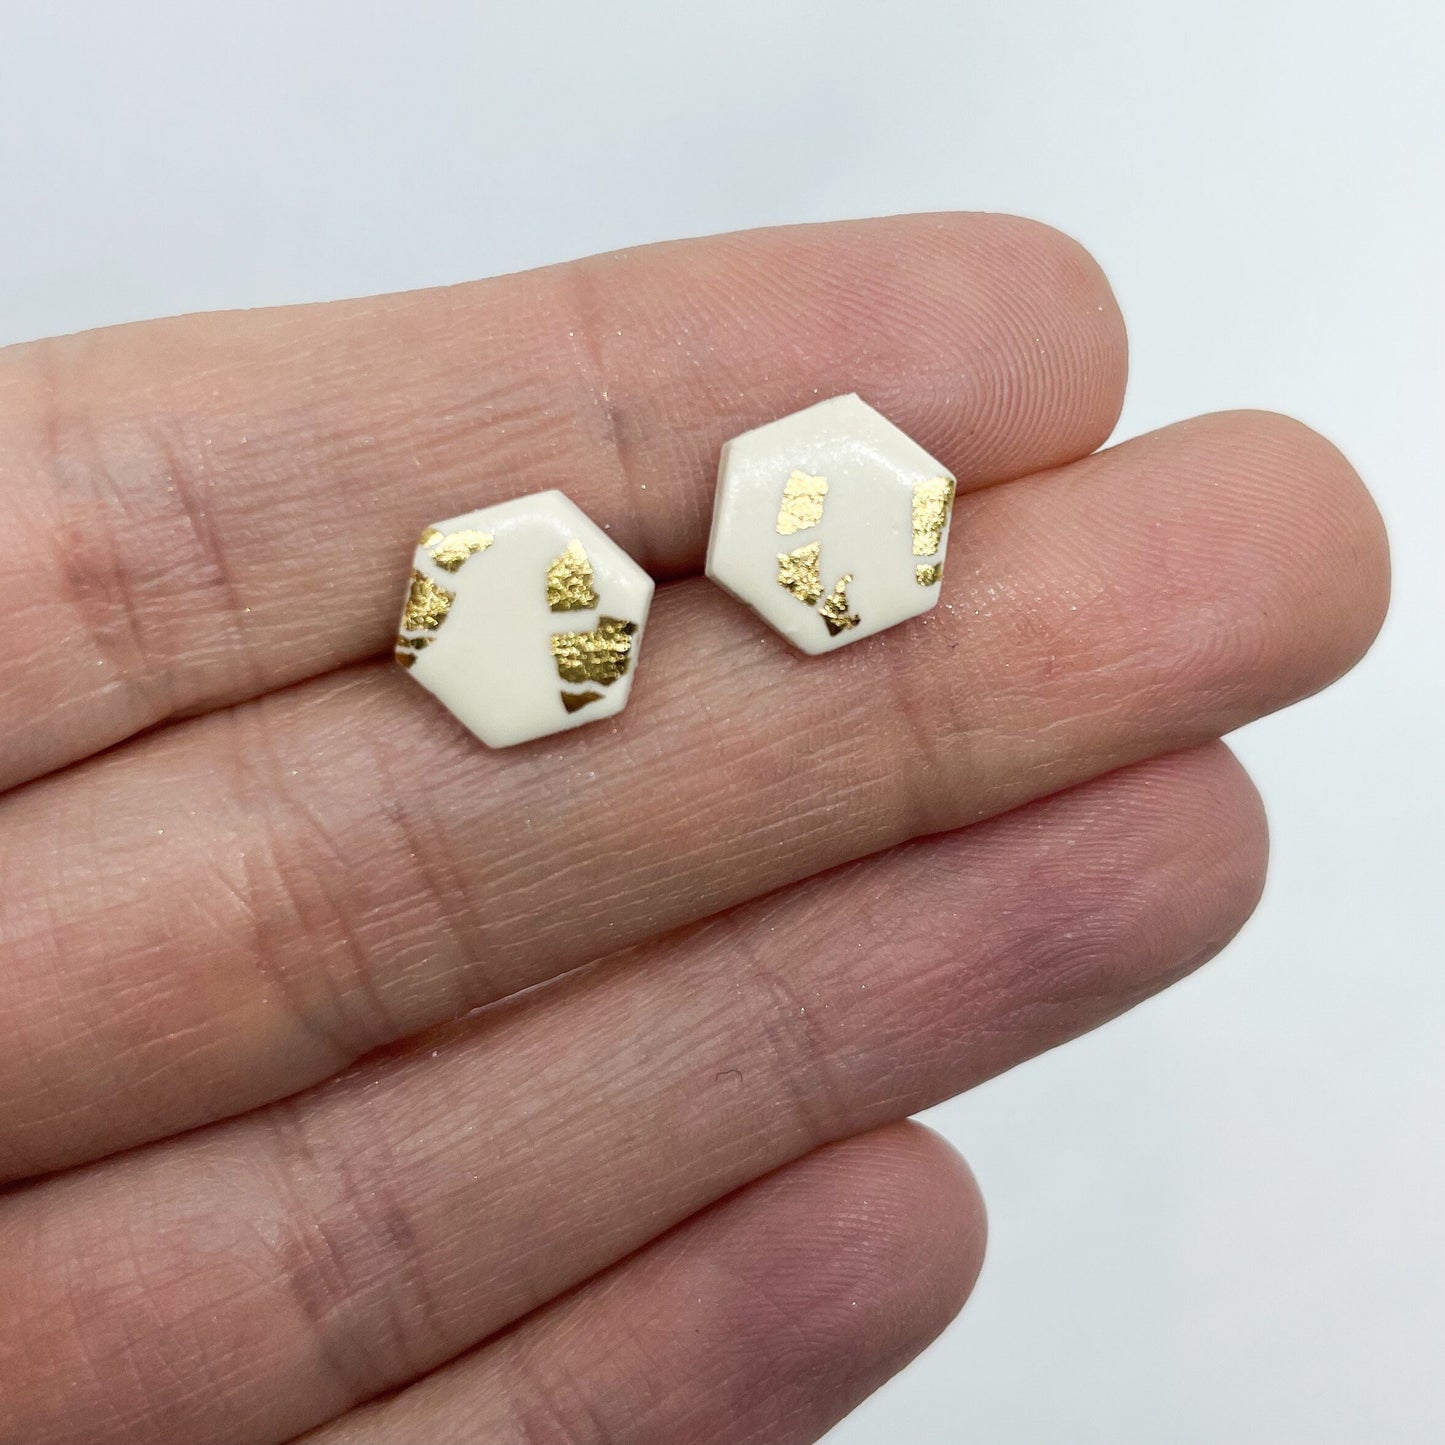 Cream and gold leaf polymer clay stud earrings, post box gift, best friend birthday gift, Mother’s Day gift, sister gift